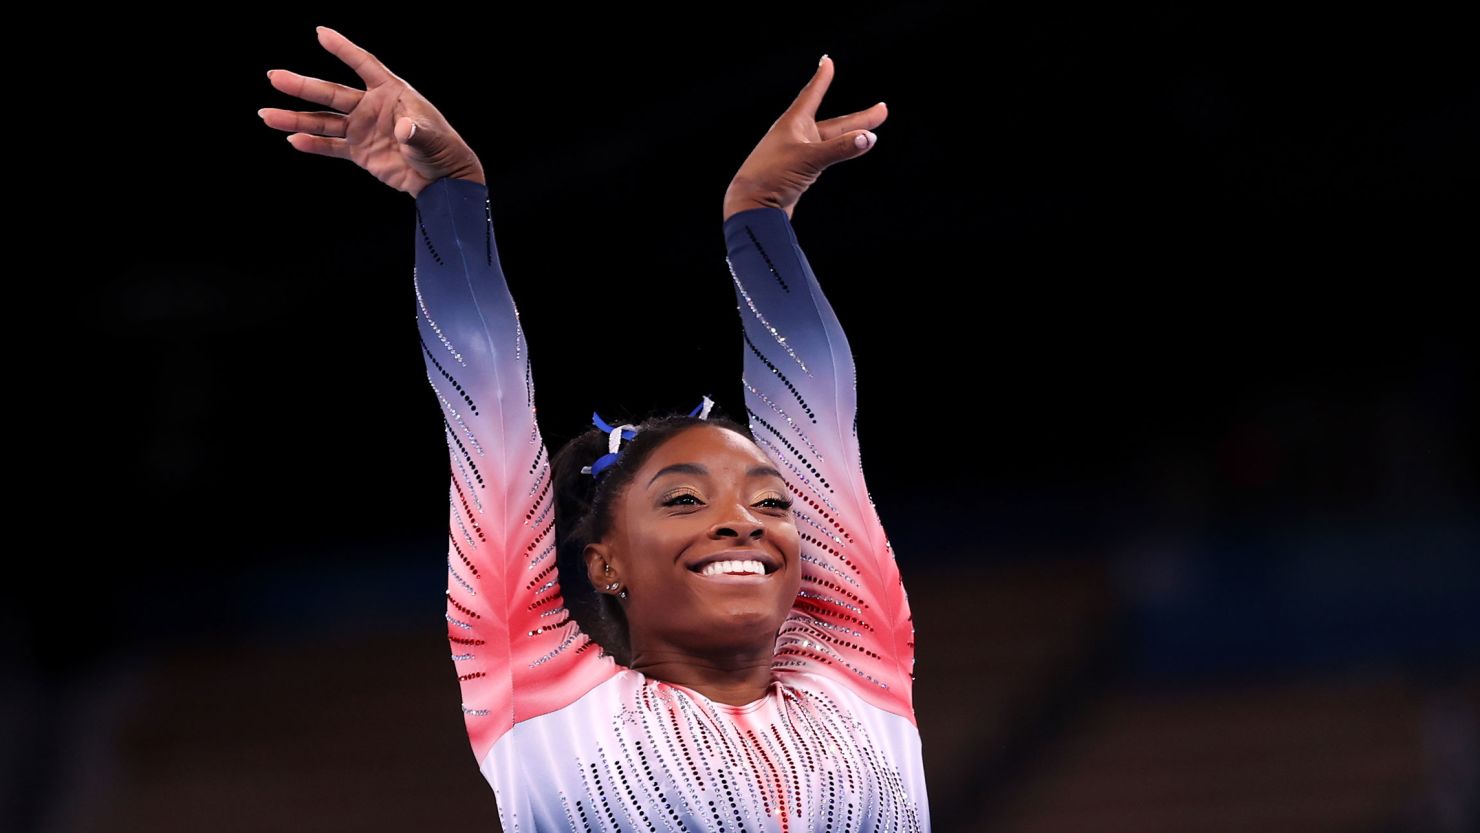 Simone Biles stepped away from 'corrosive' gymnastics for mental